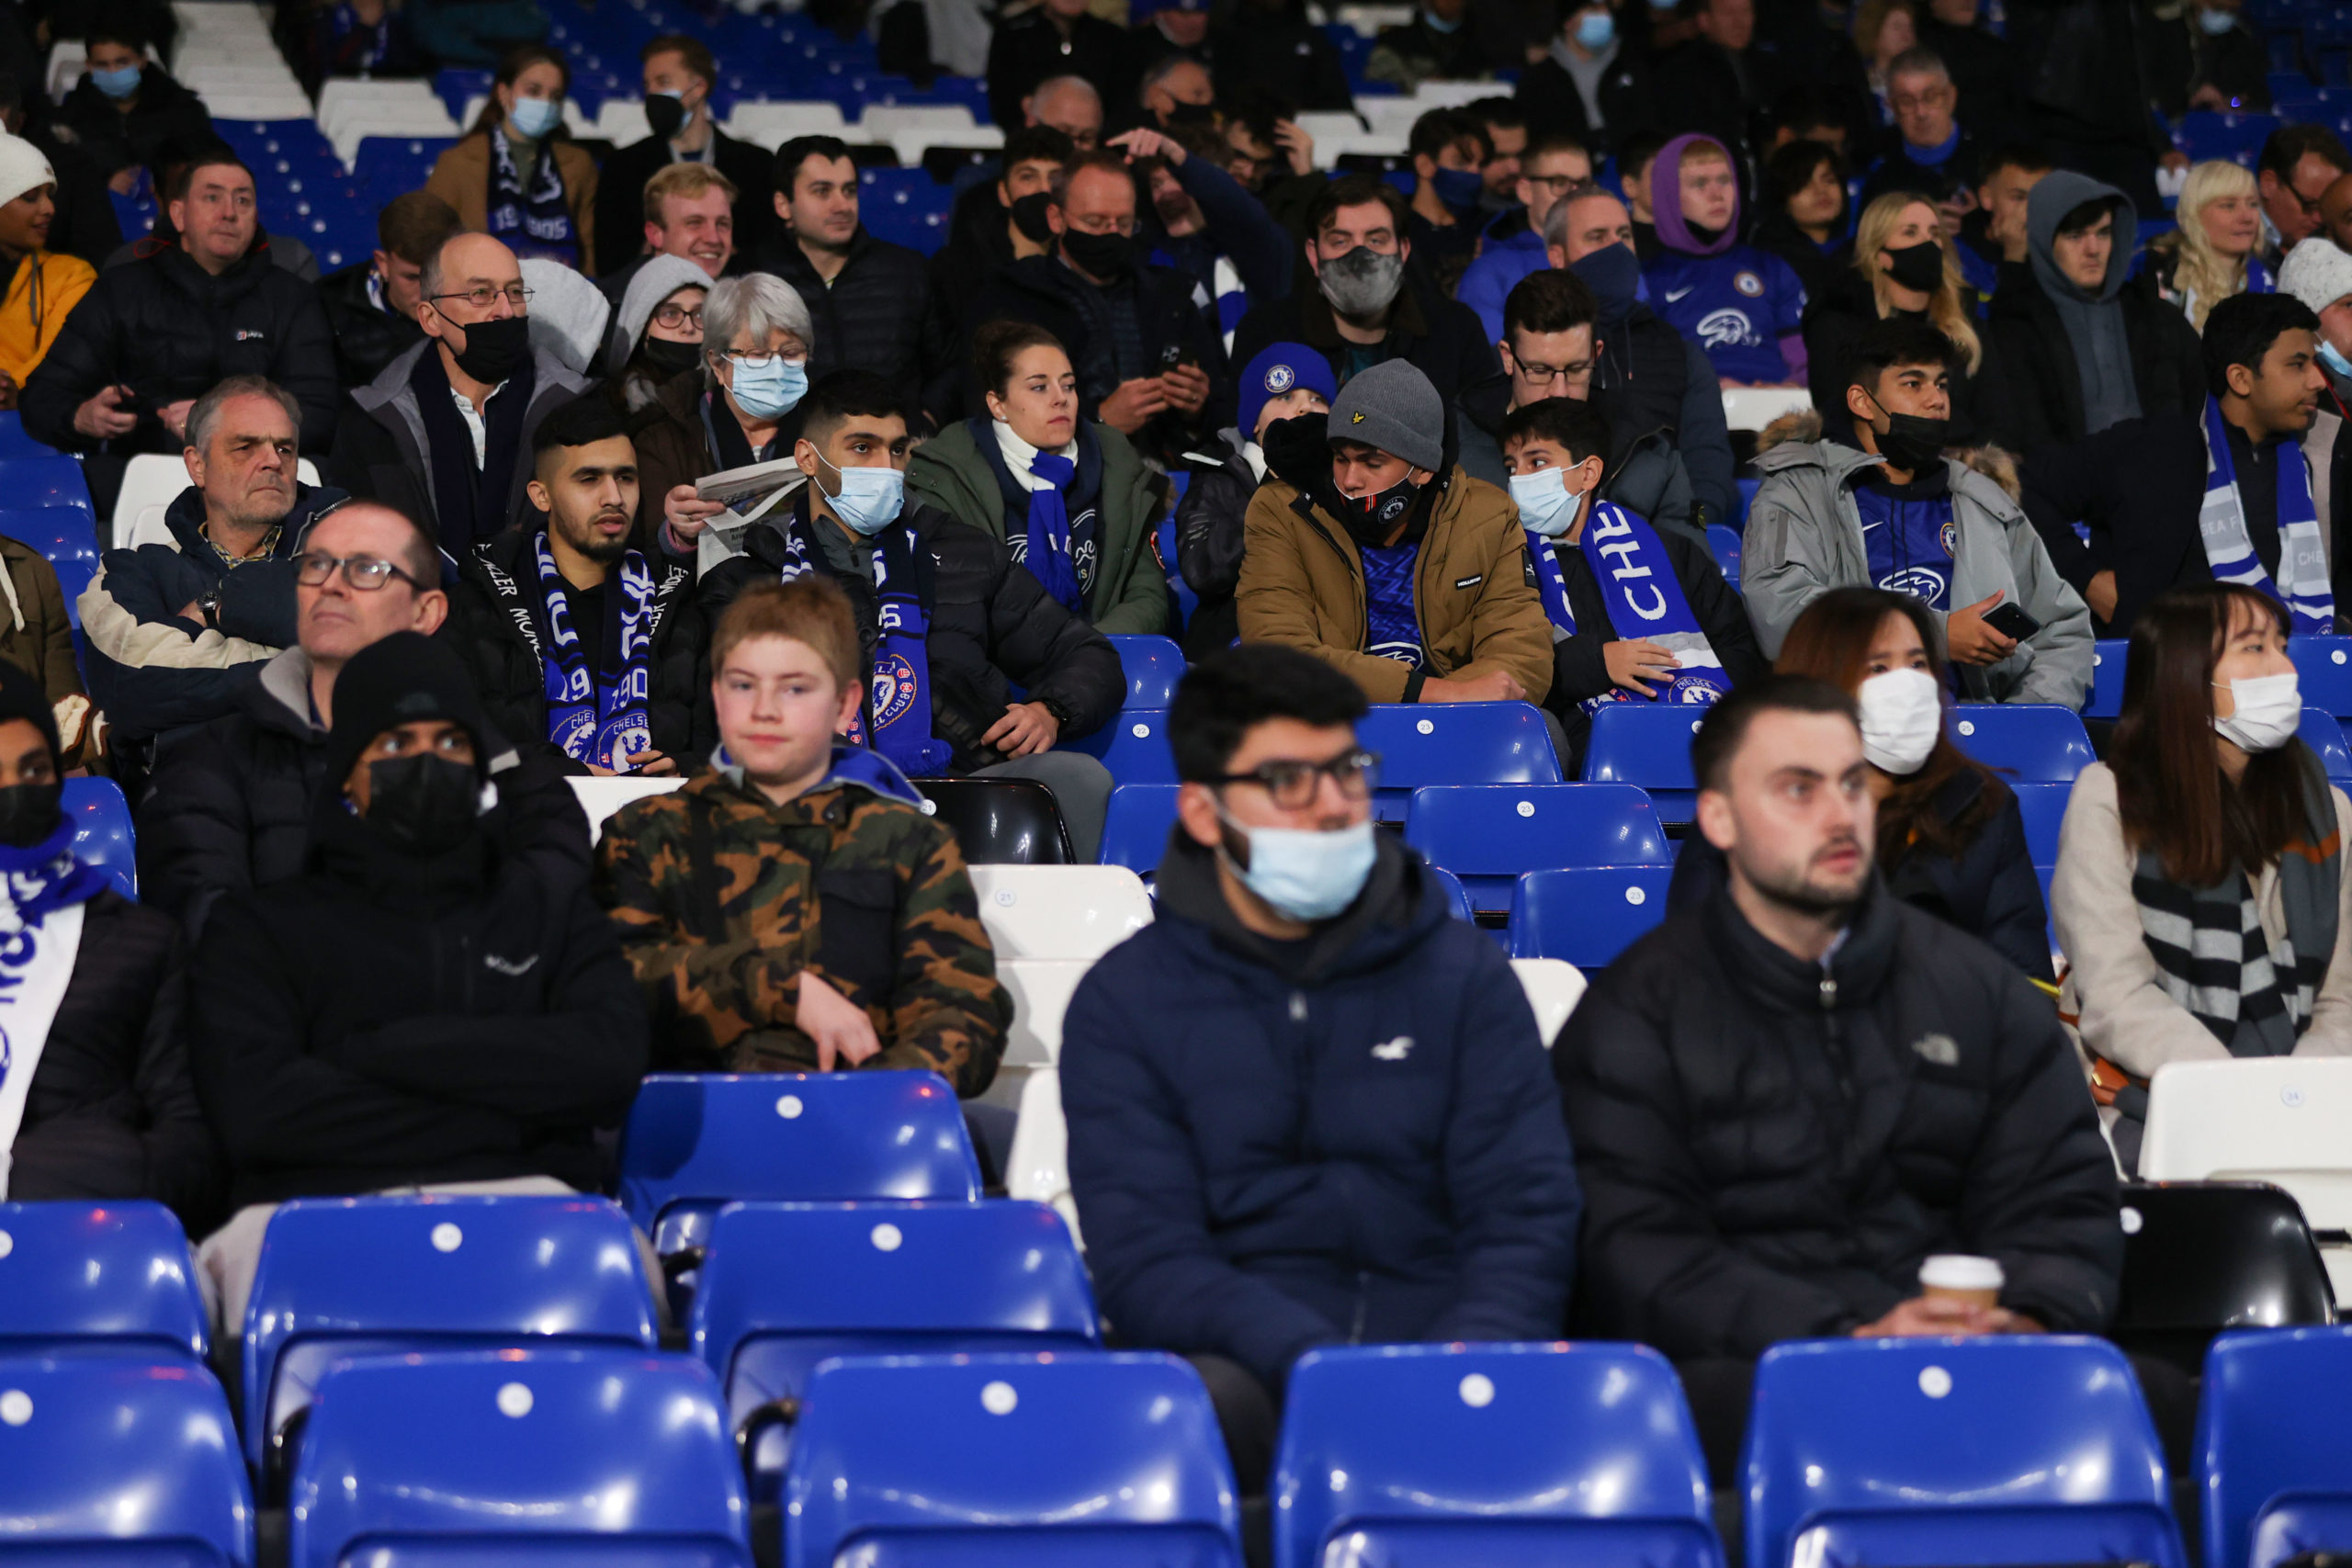 Chelsea fans rage after Premier League reportedly turned down club's request to postpone Wolves game